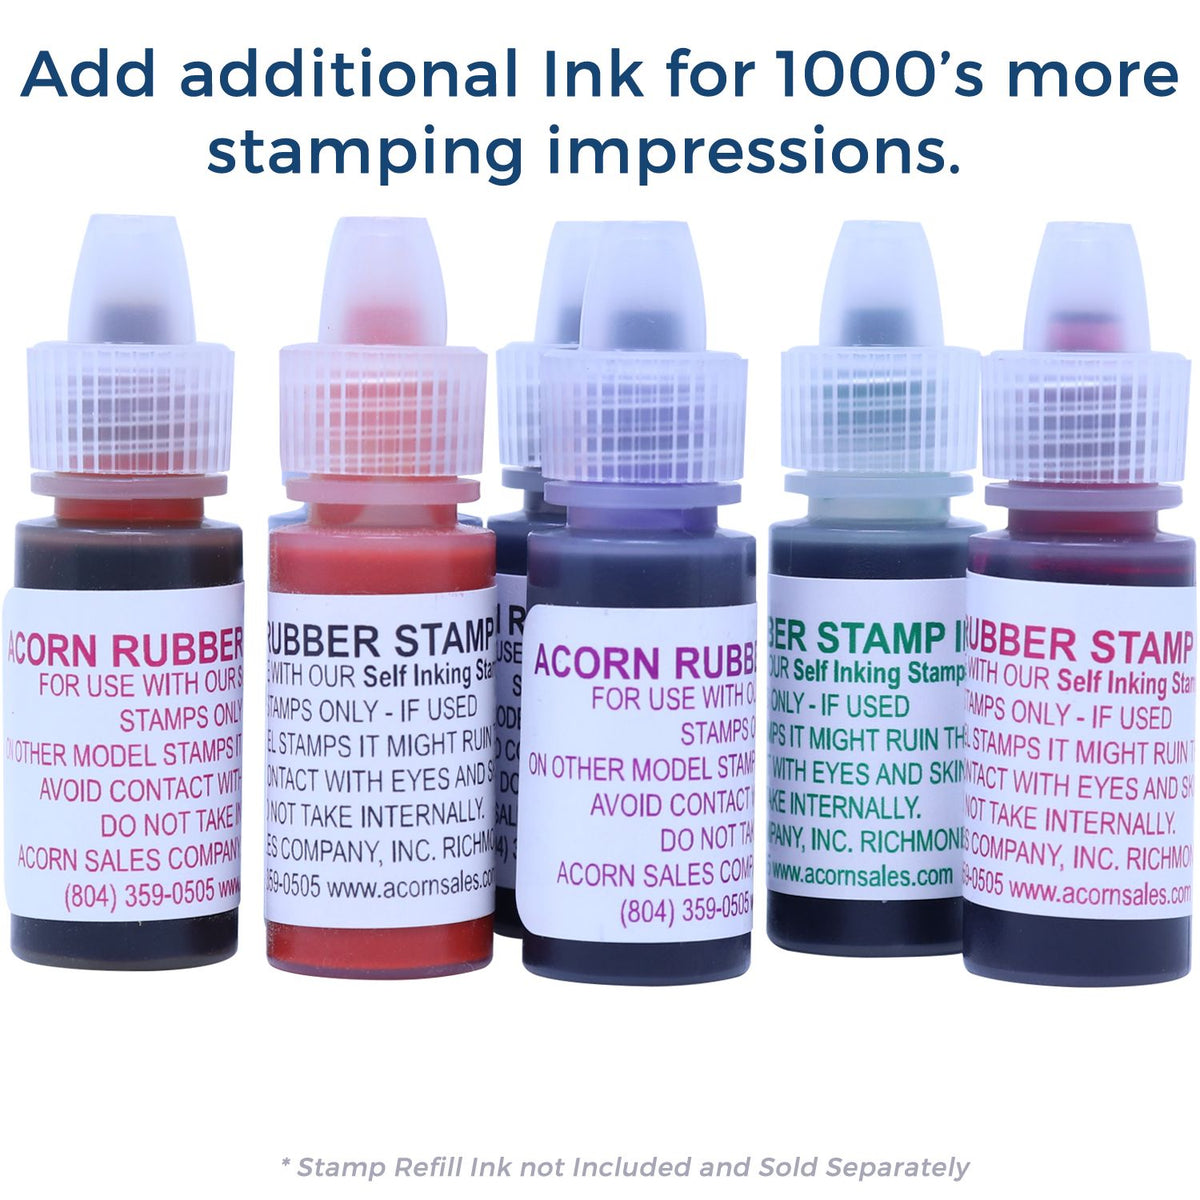 Refill Ink for Self-Inking Round Thumbs Up Stamp Available